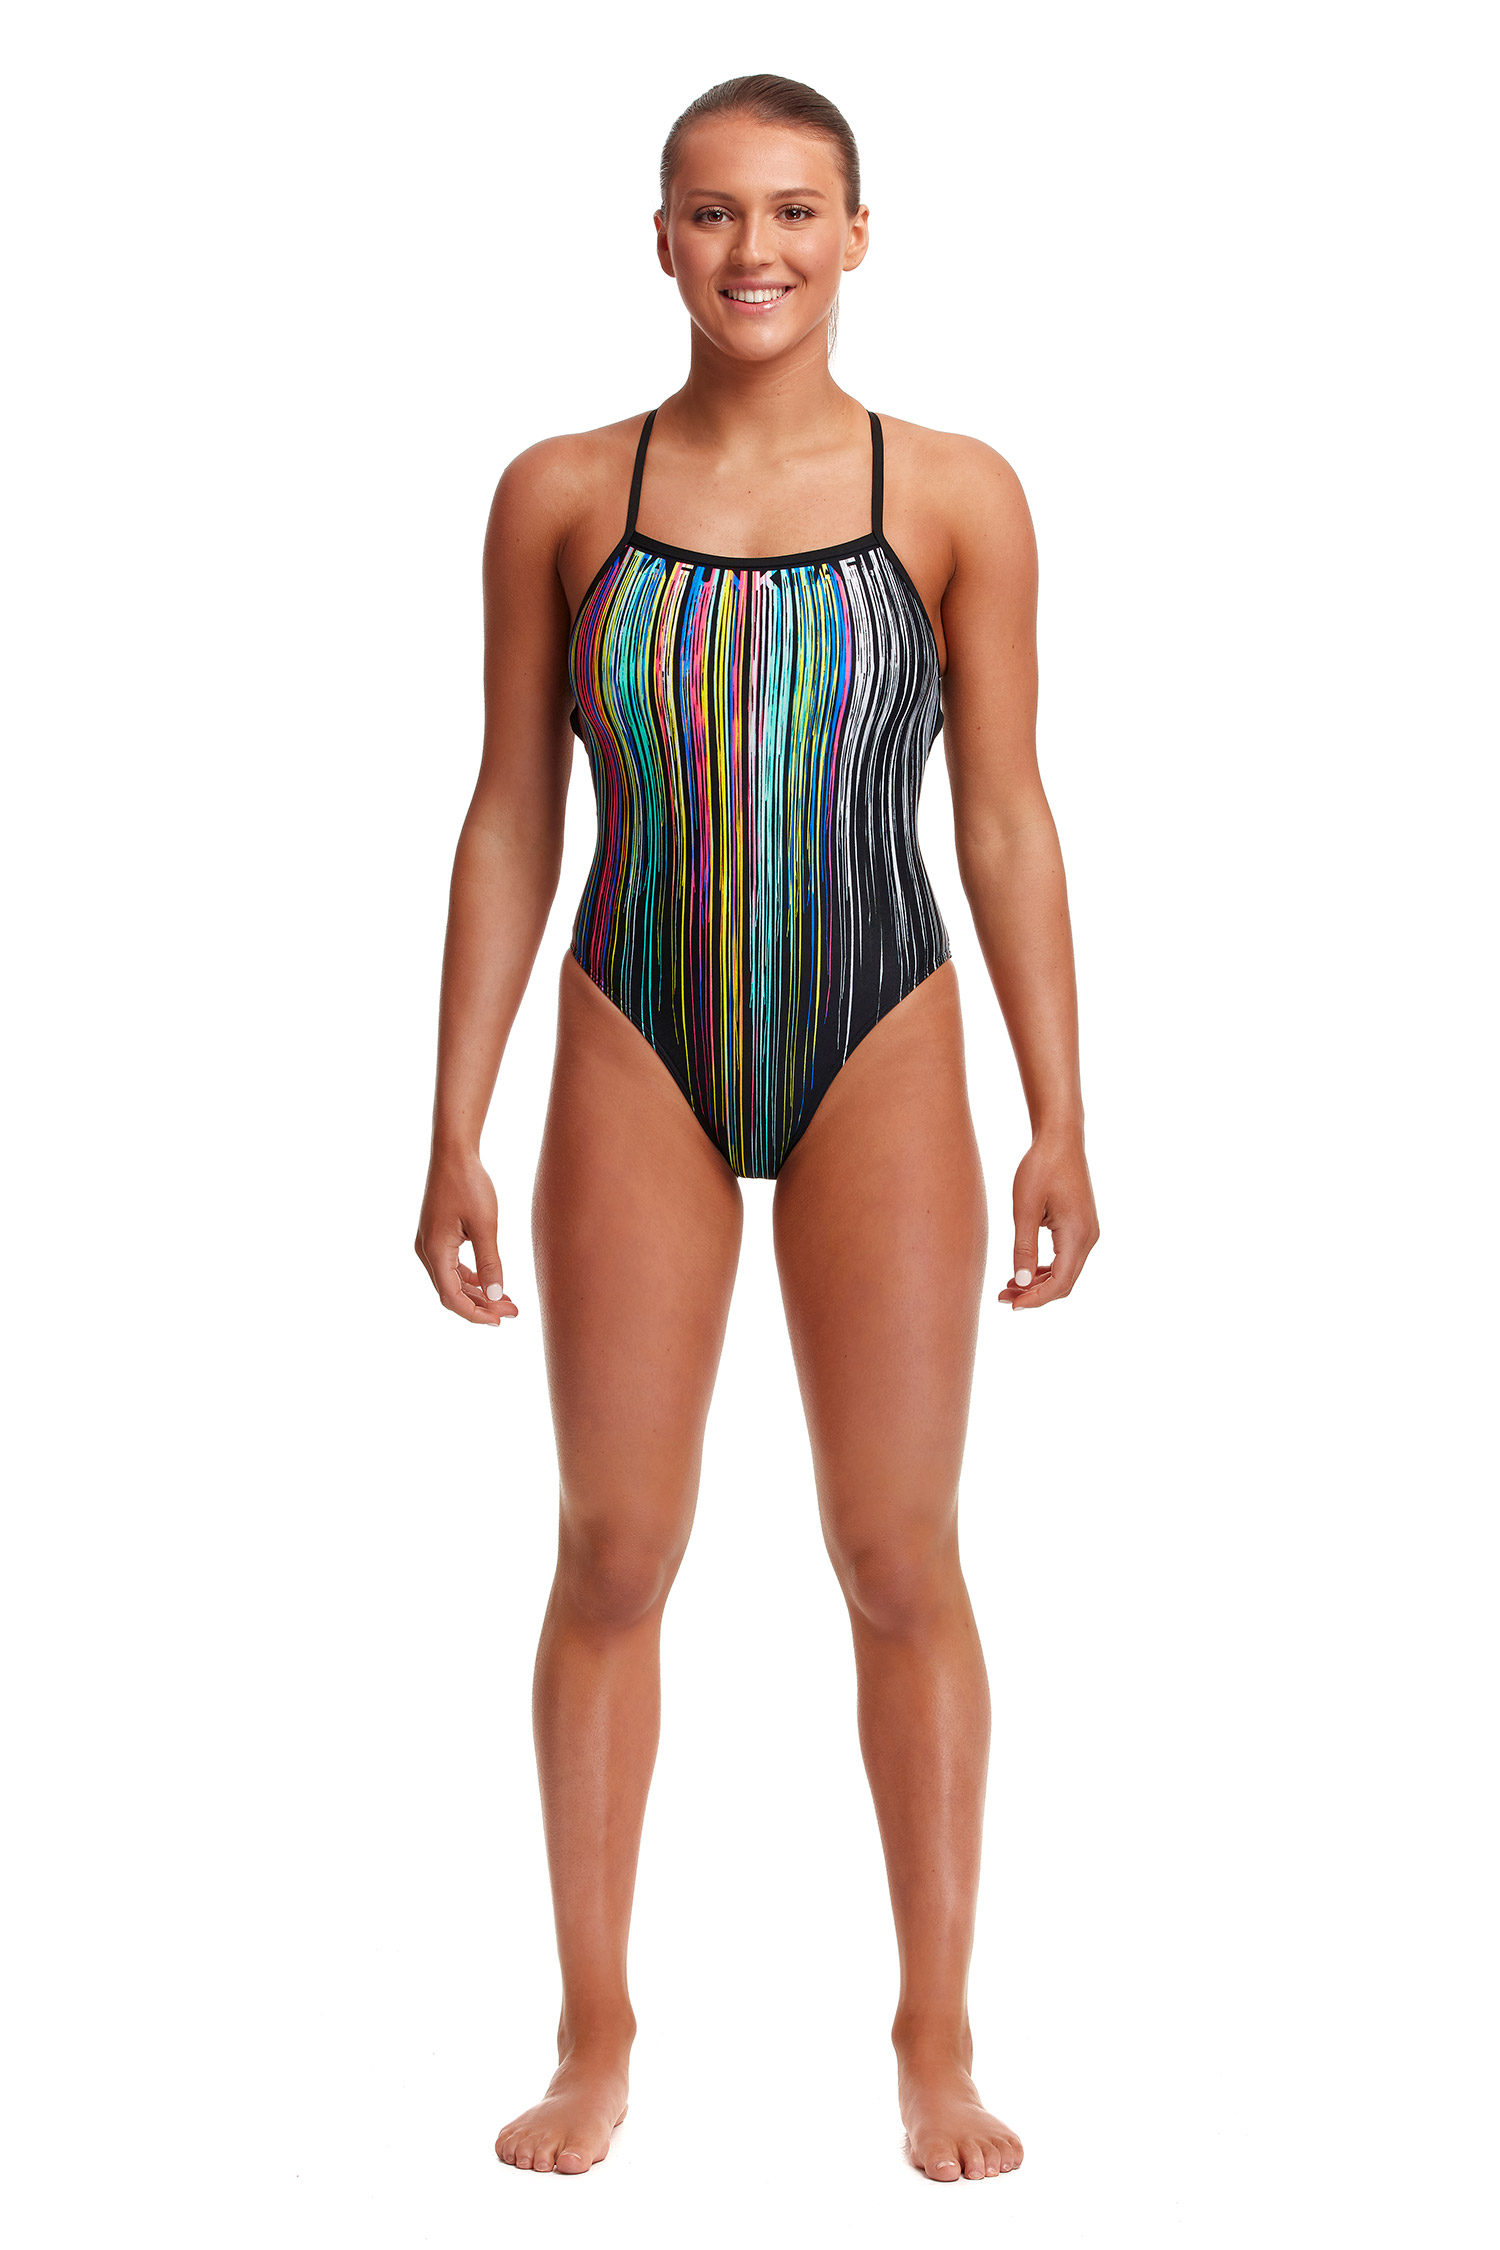 Funkita Ladies Drip Funk Strapped In One Piece